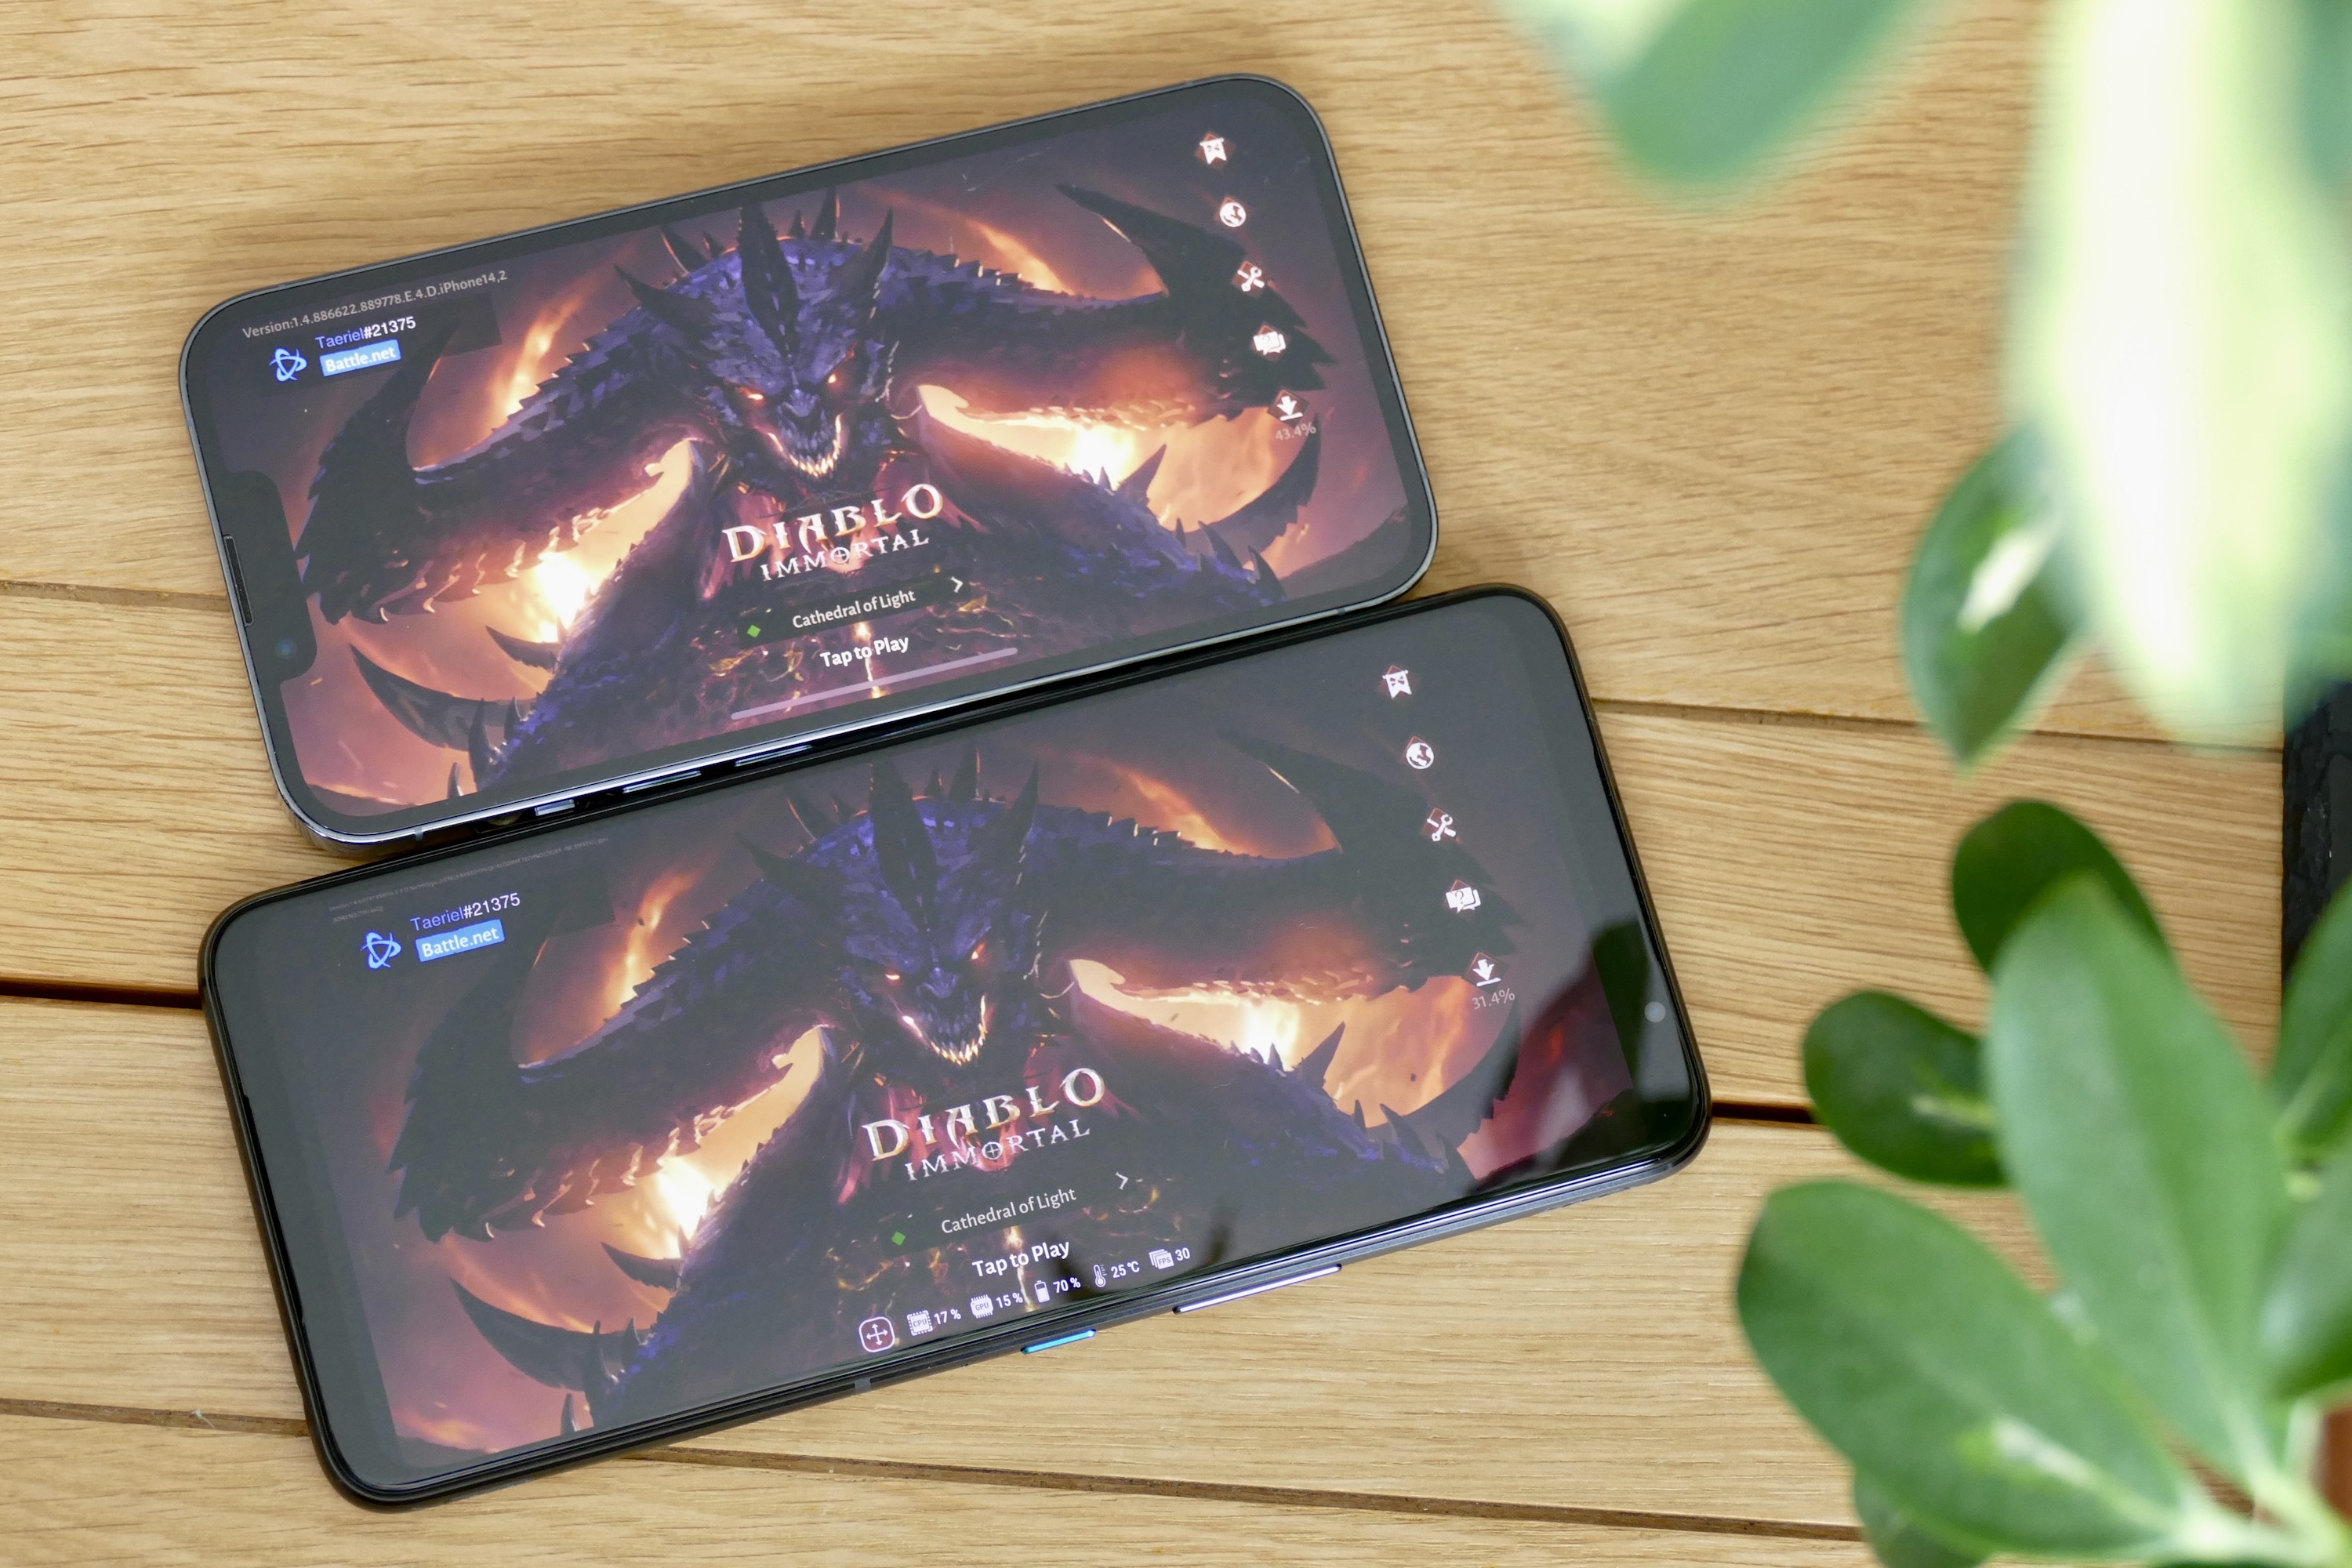 Diablo Immortal on the iPhone 13 Pro and the Asus ROG Phone 5.